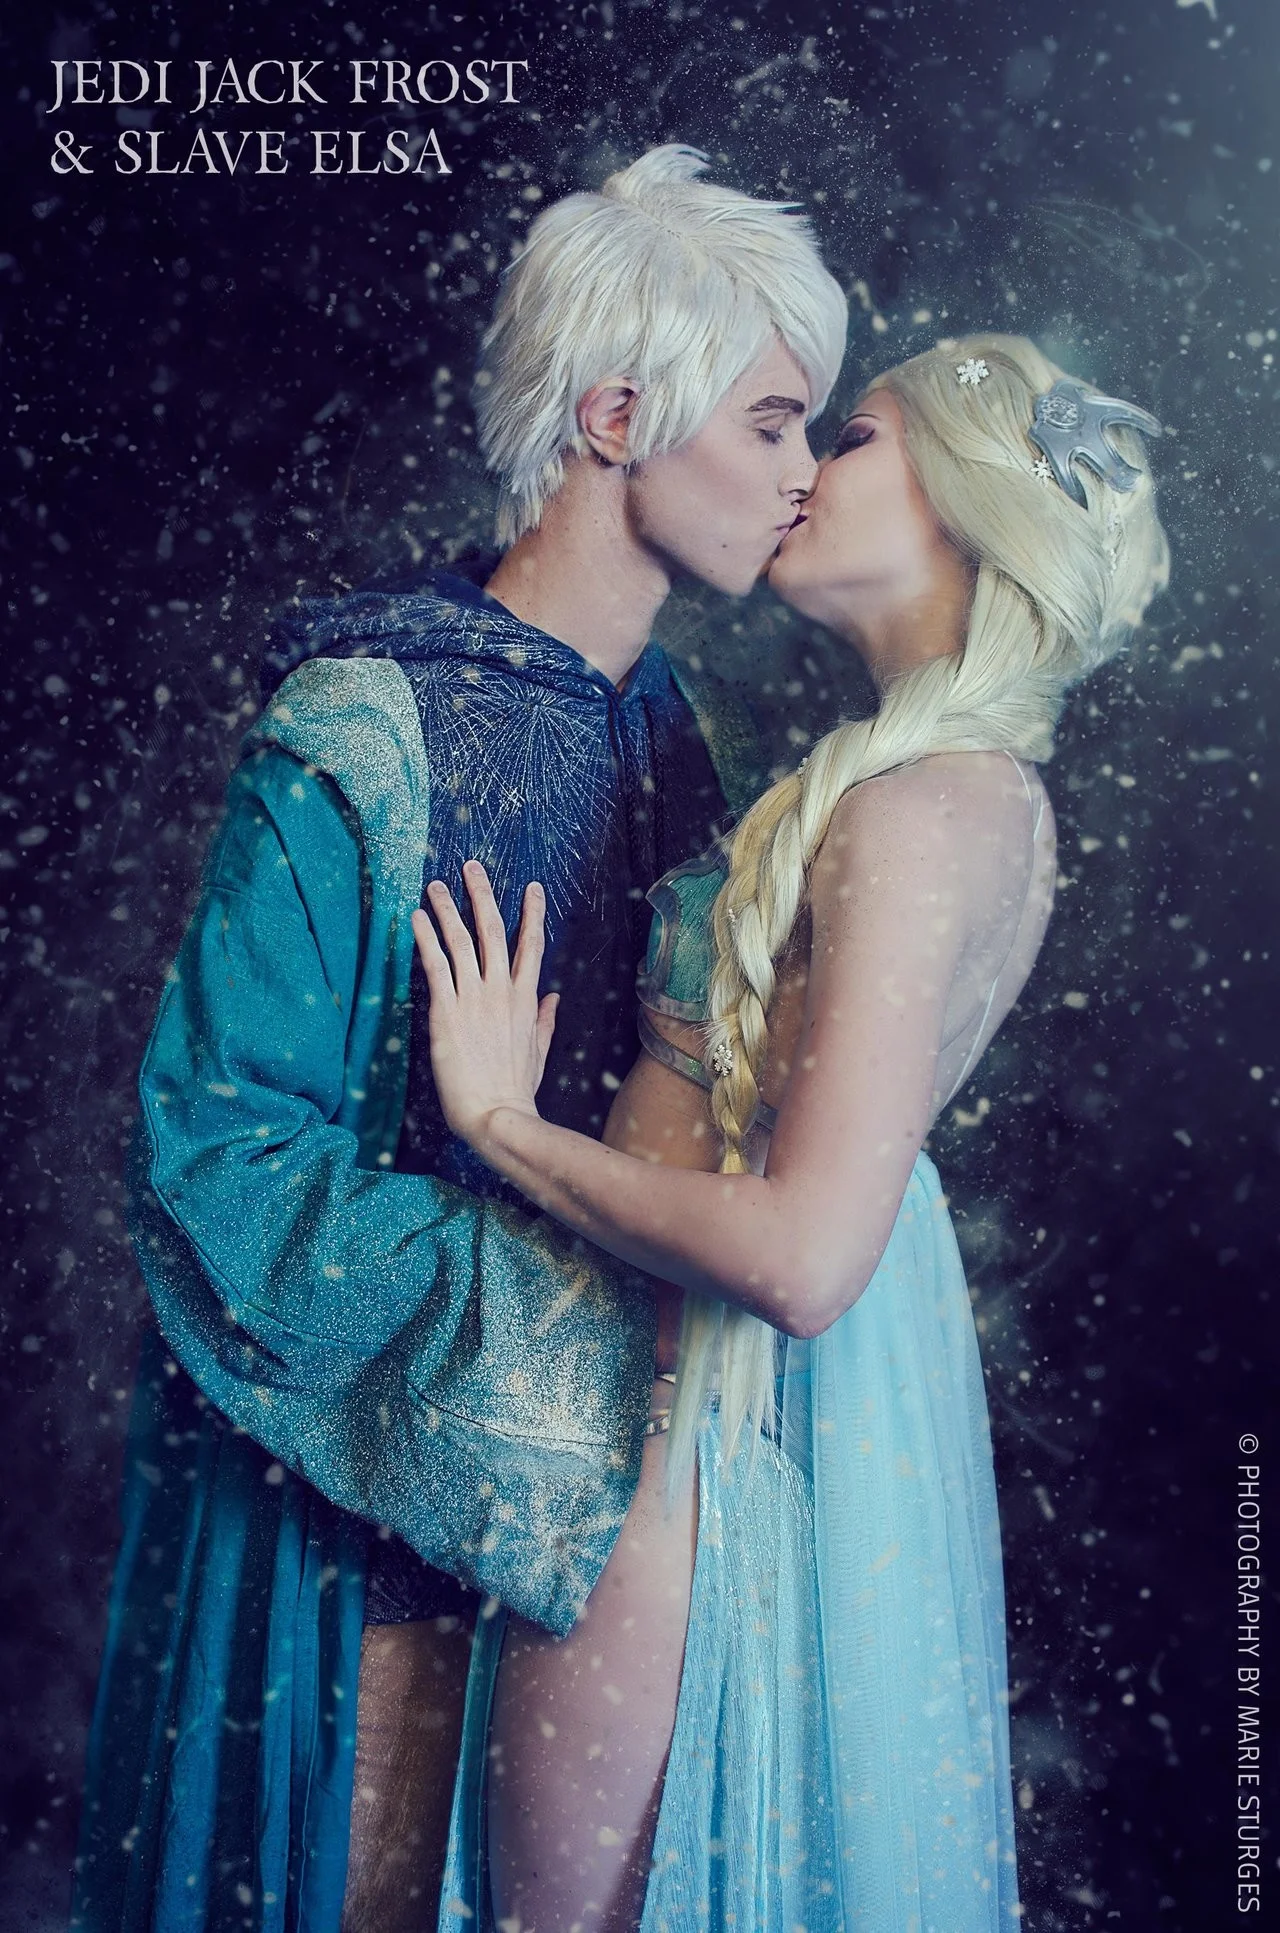 Jedi Jack Frost and Slave Elsa by mariesturges